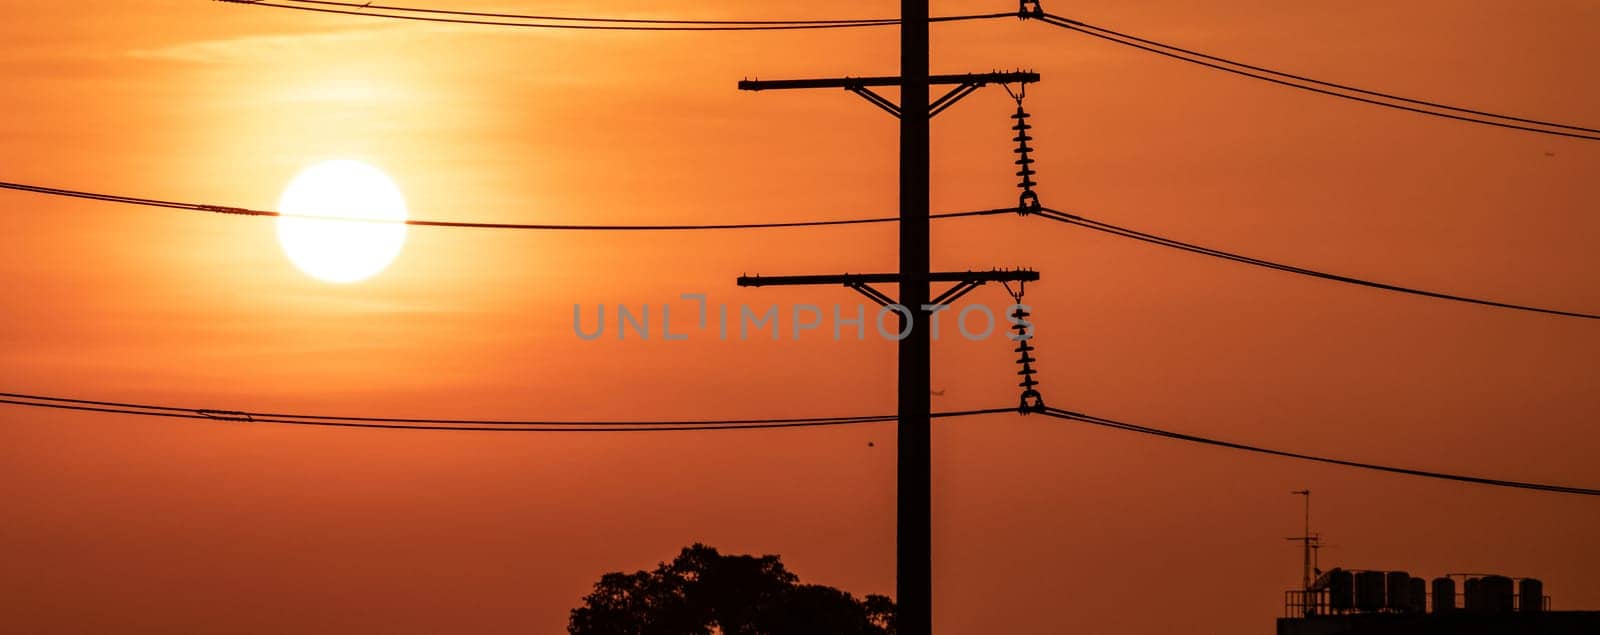 High voltage electric transmission pylon. High voltage power lines against sunset sky. Electricity pylon and electric power transmission lines. High Voltage pole provide power supply. Energy crisis. by Fahroni